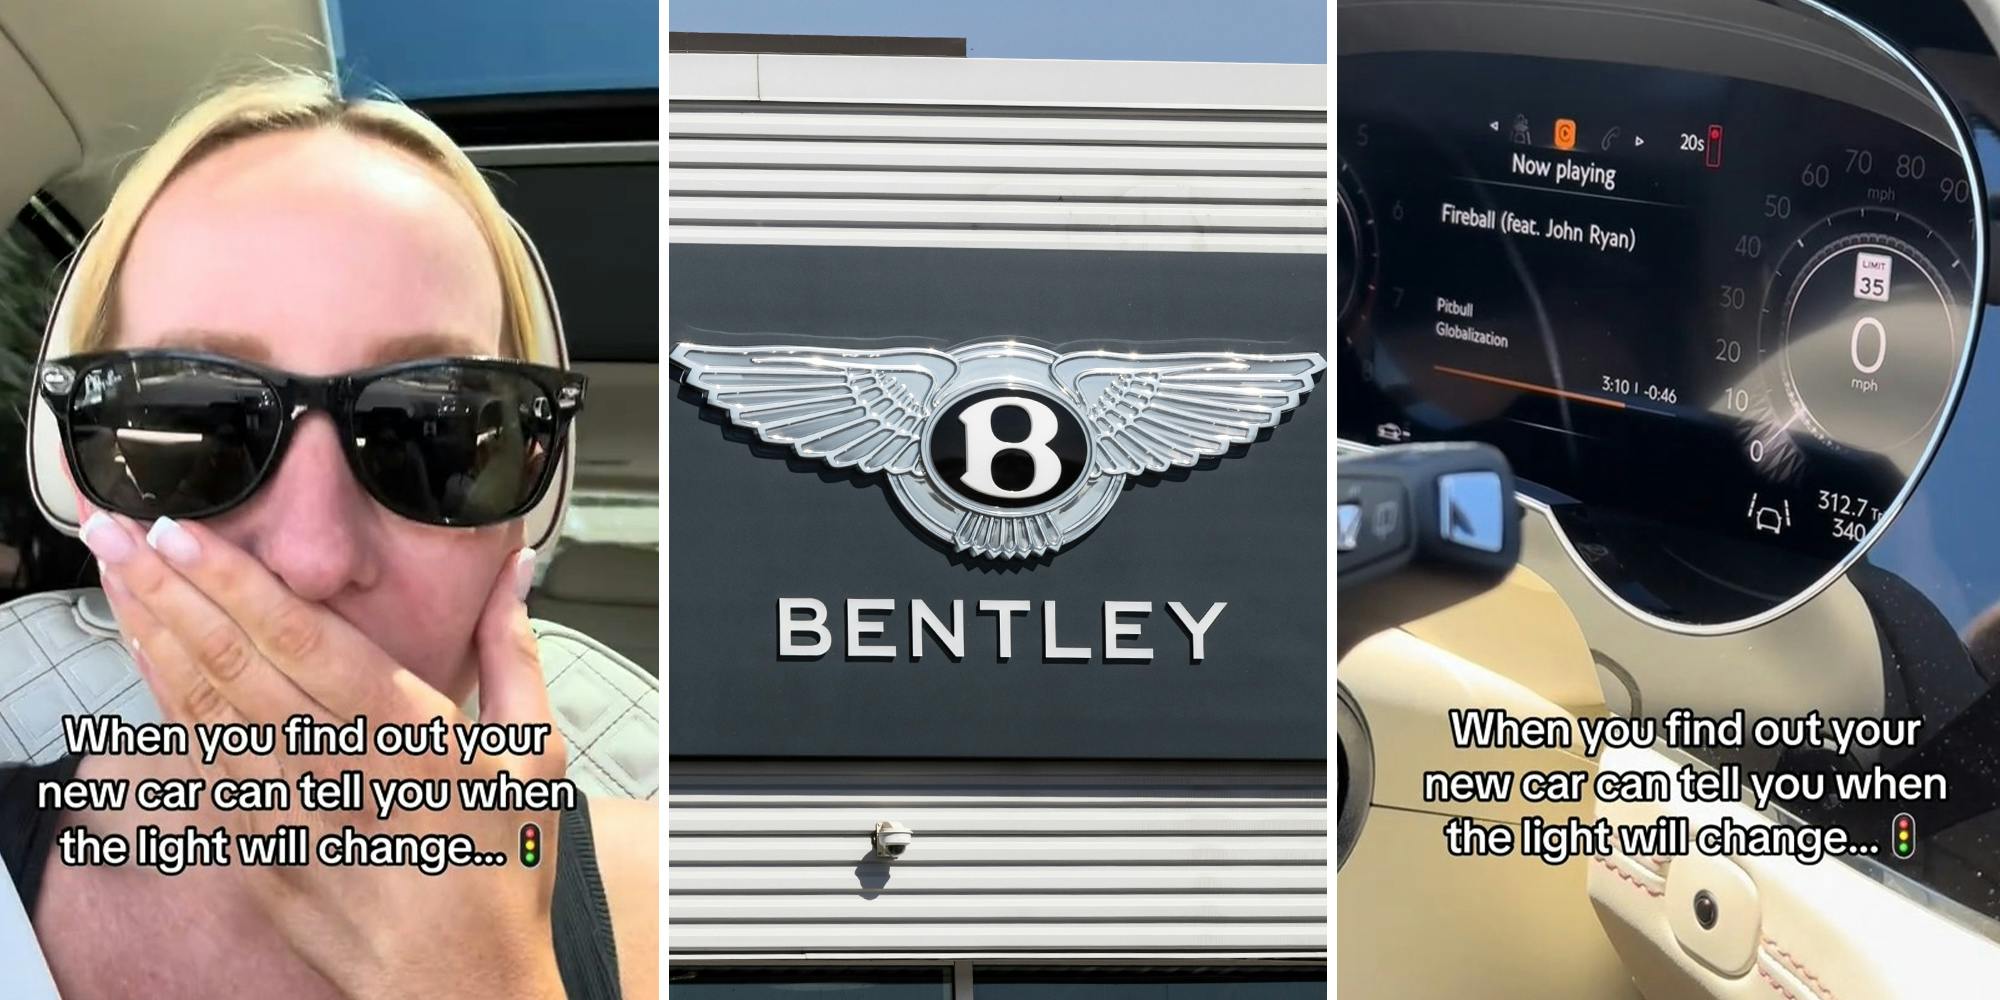 ‘How does it know?!’: Bentley driver shocked by this feature in new car. Other cars do it too